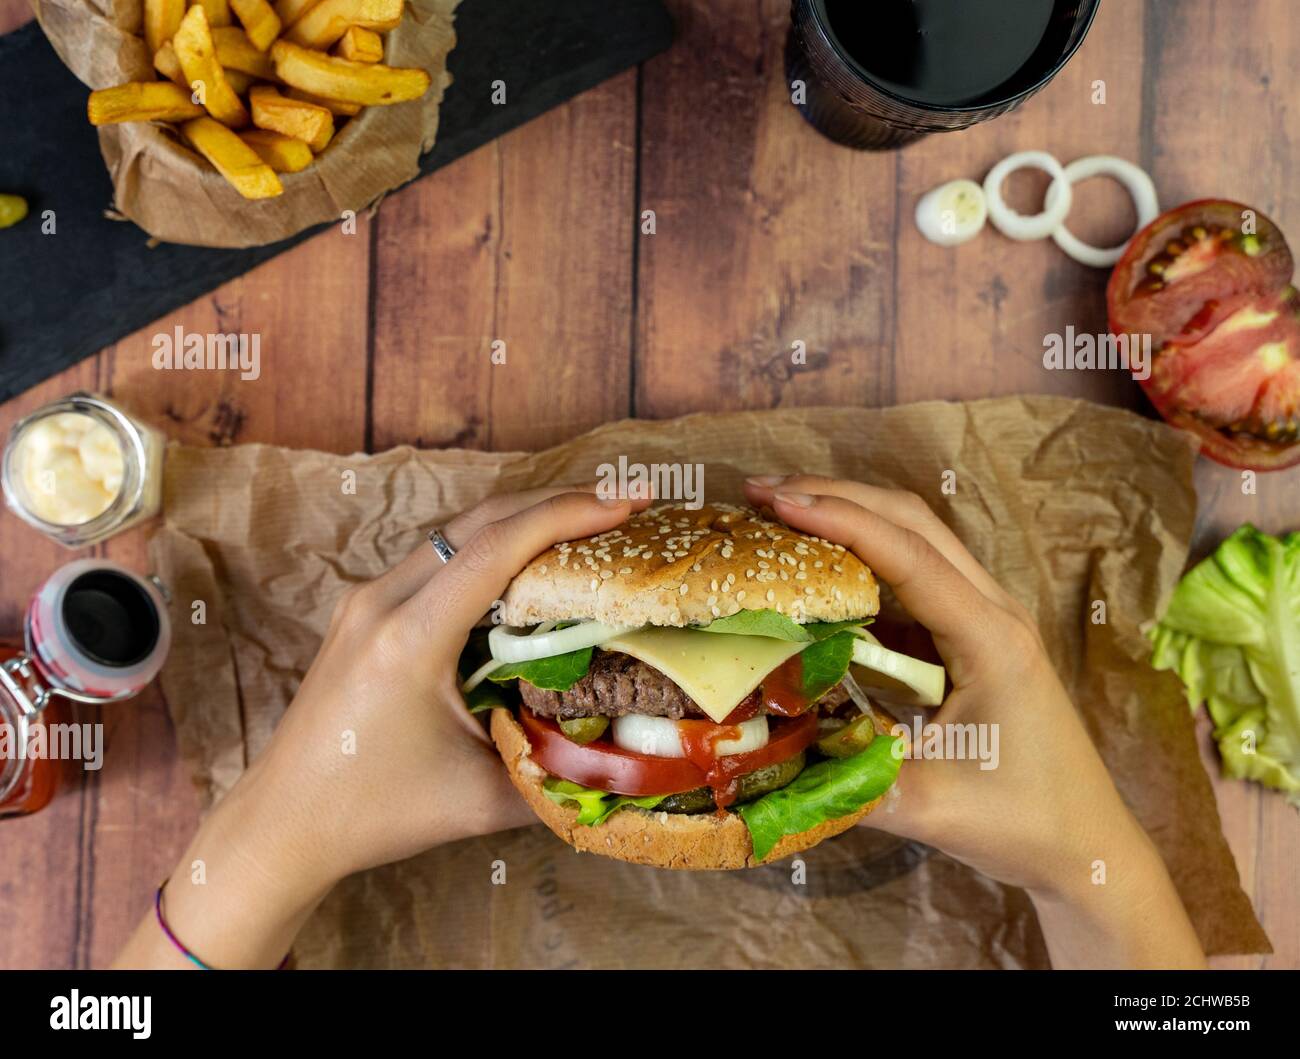 Person holding a burger with fries, onion rings and tomato on wooden table Stock Photo